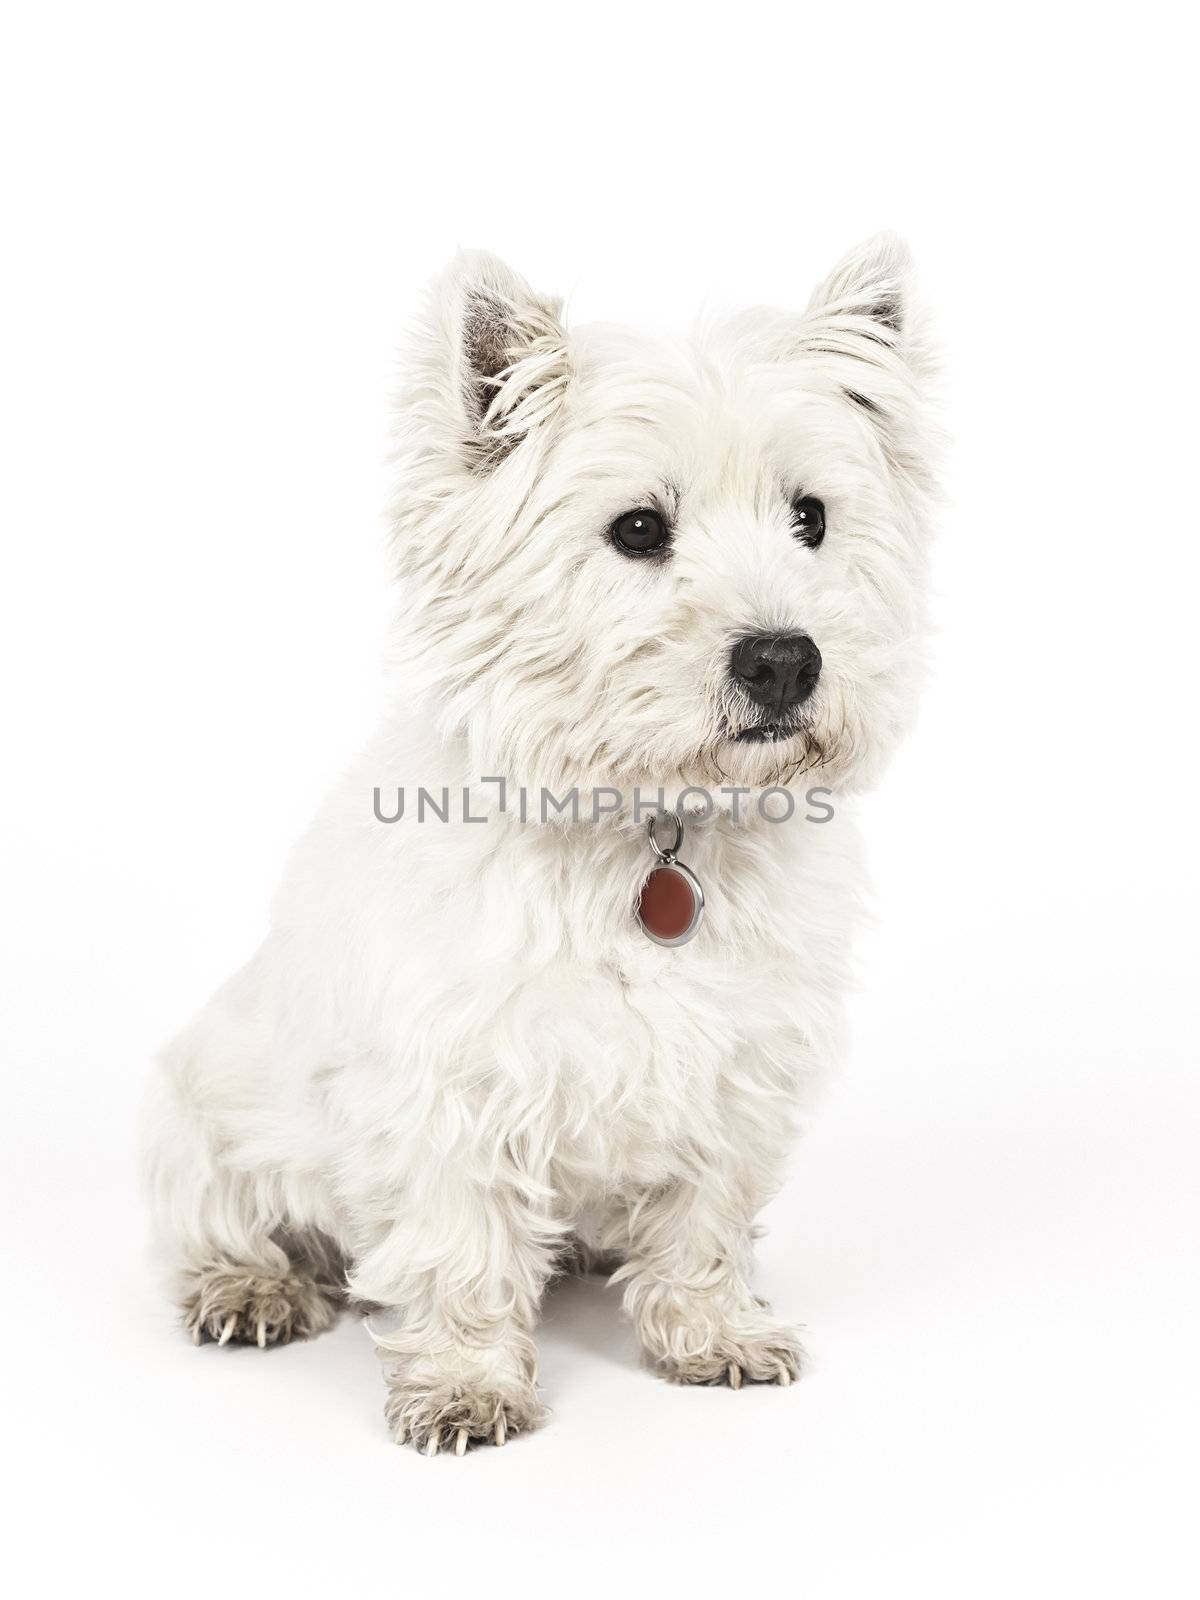 An image of a nice white Terrier